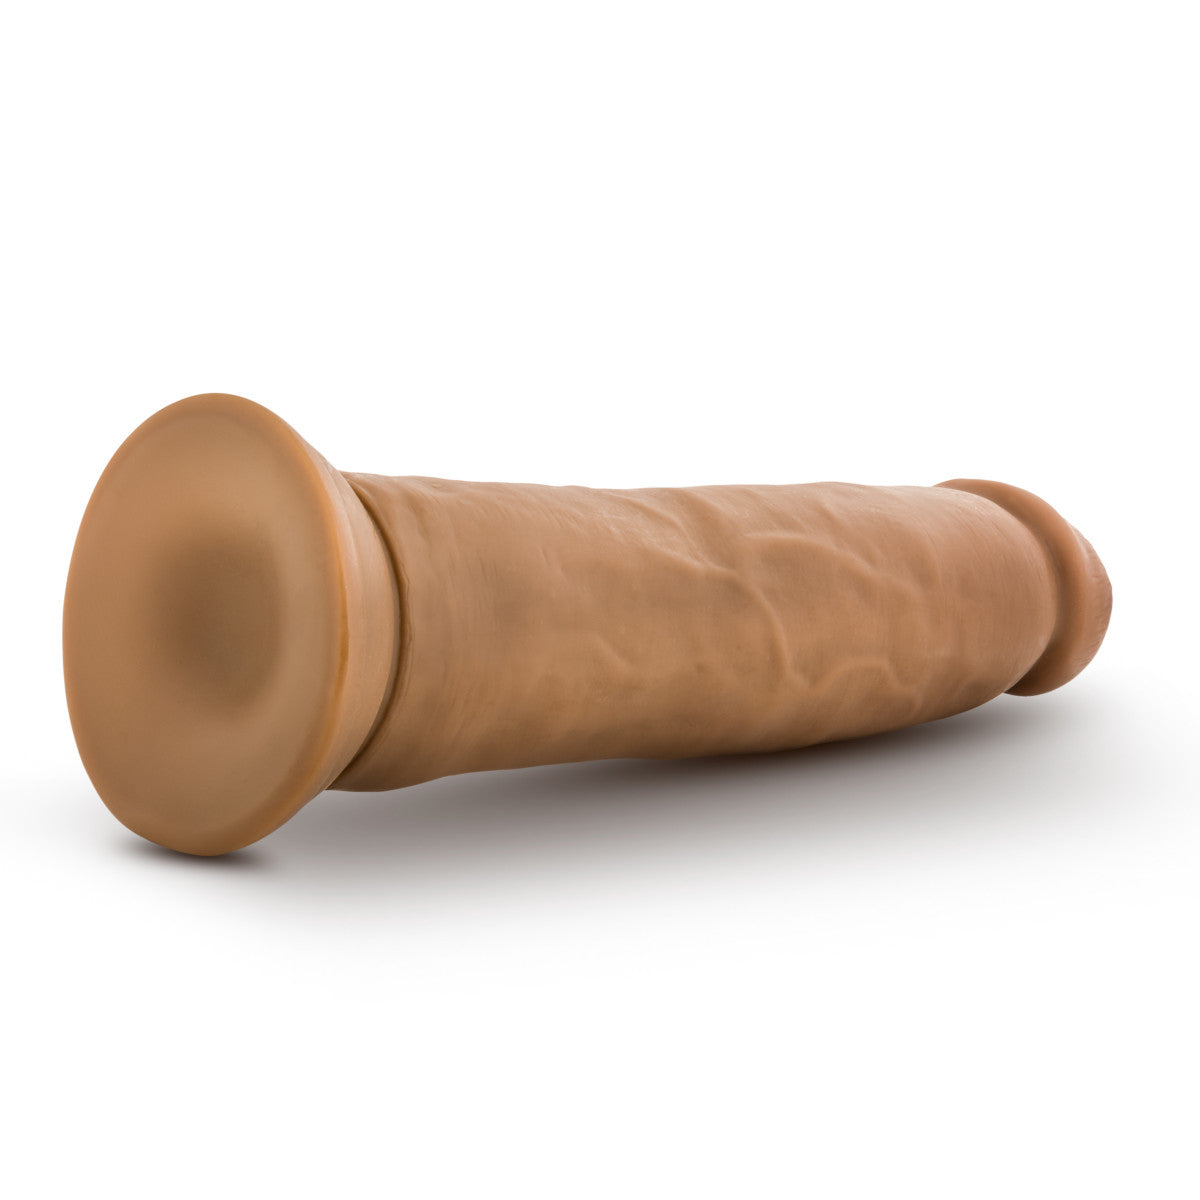 Au Naturel Carlos Realistic Mocha 9.5-Inch Long Dildo With Suction Cup Base